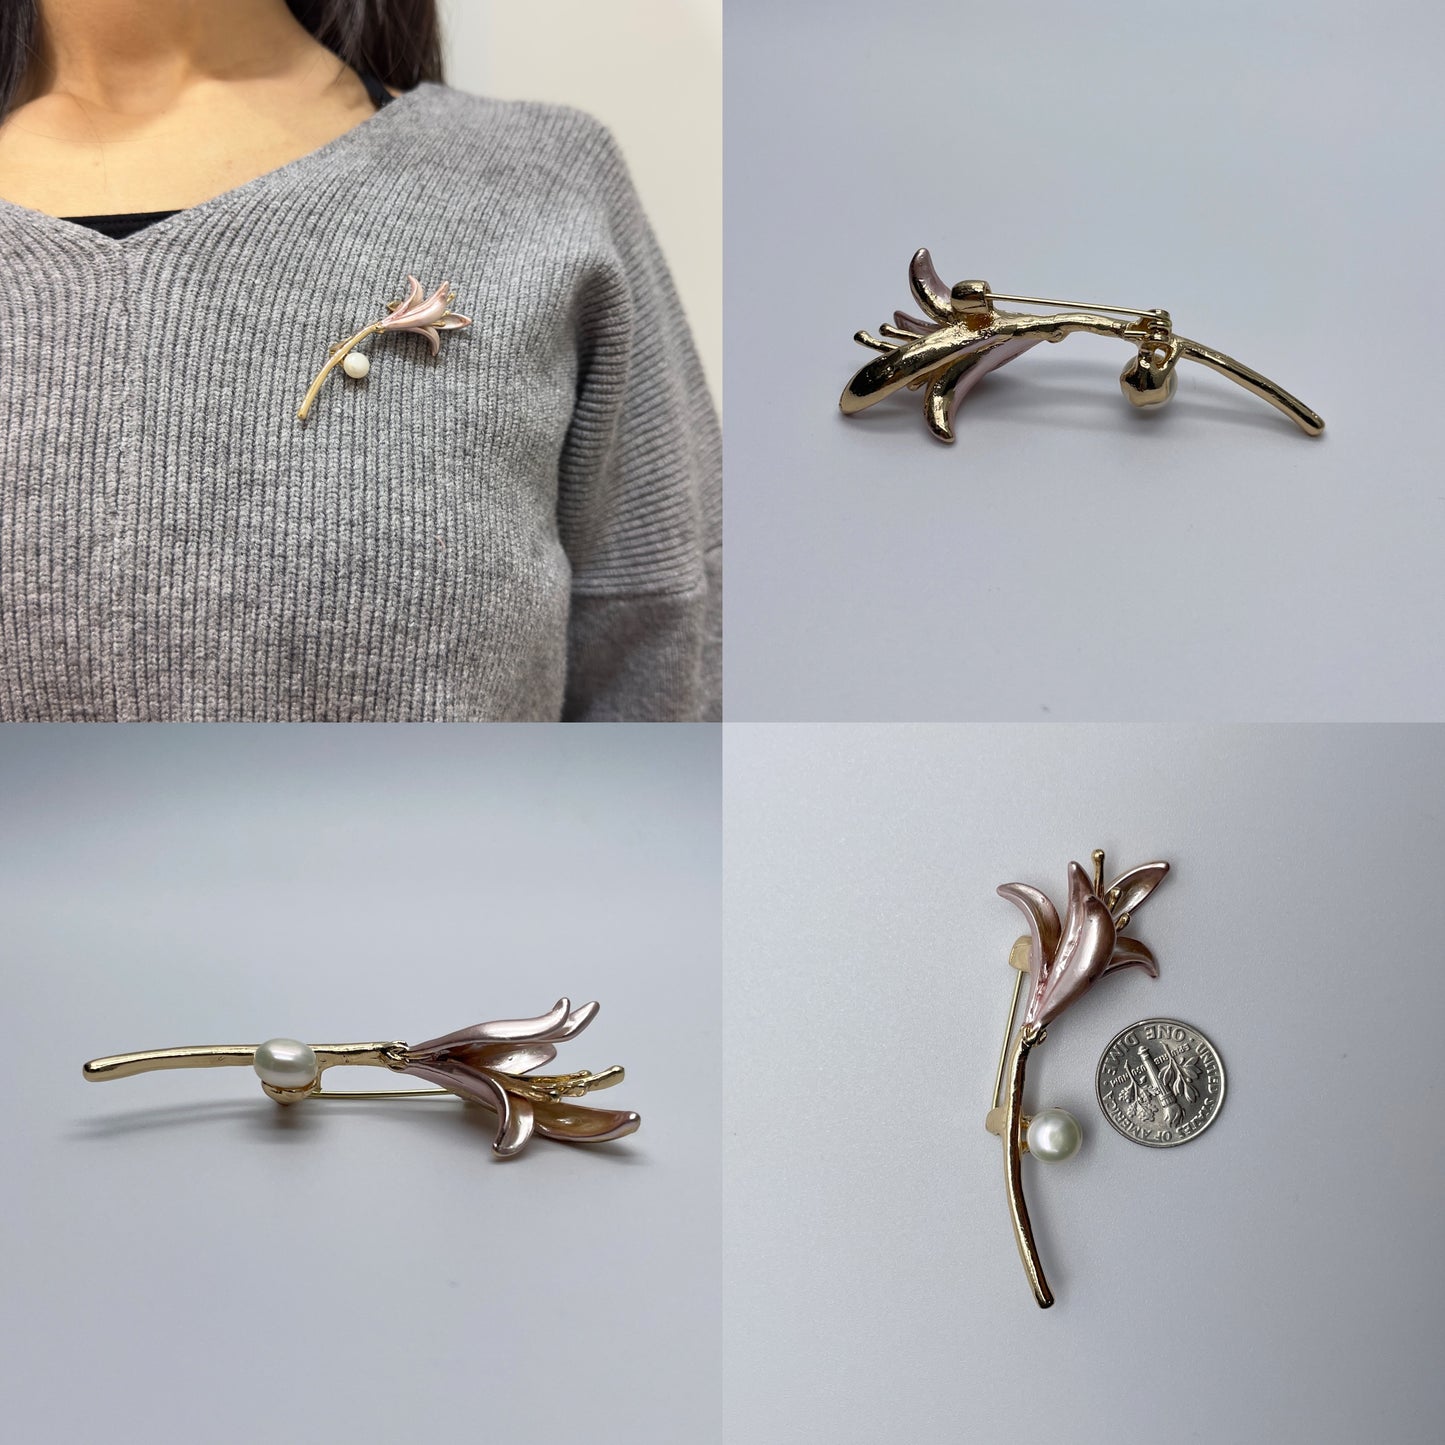 Stonelry Elegant Pearl Brooch Pin - Perfect for Any Occasion